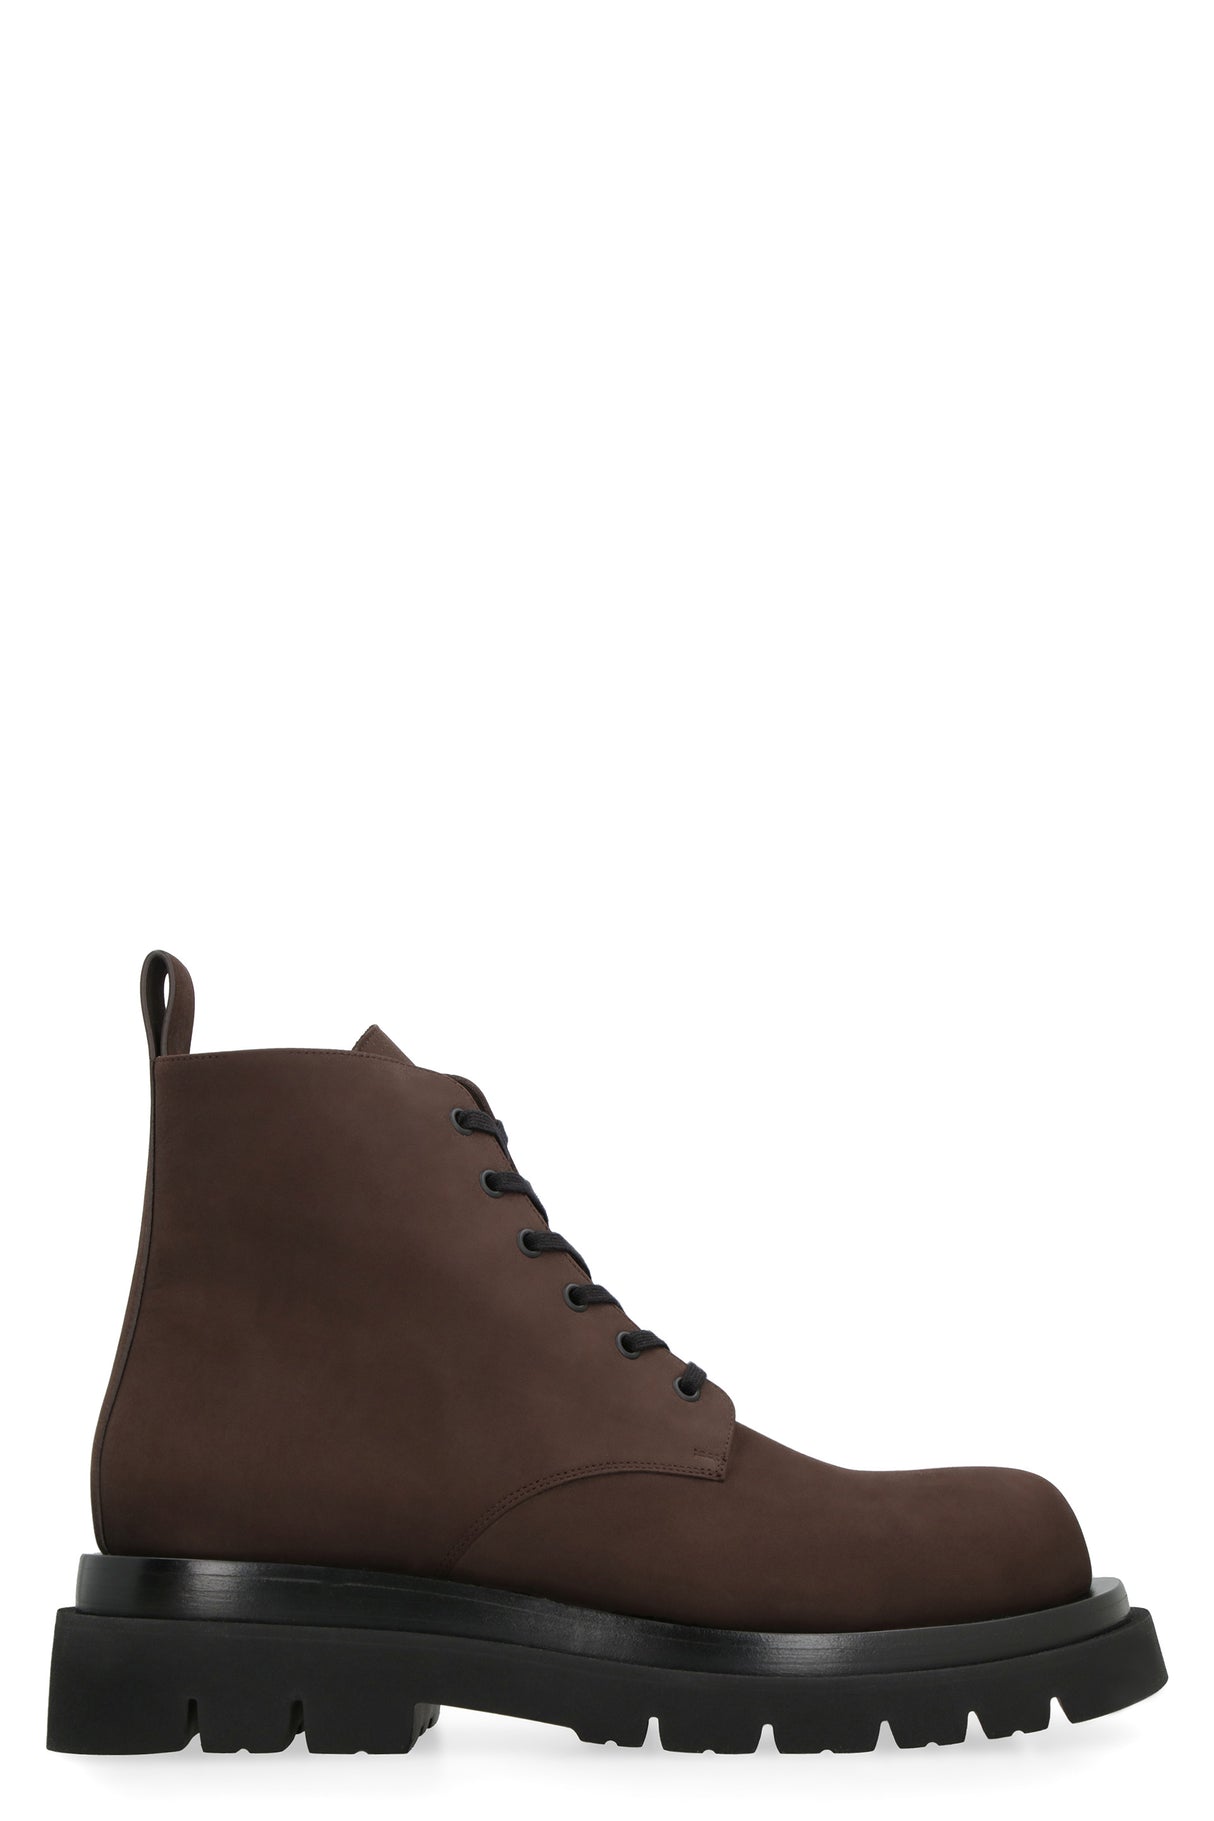 BOTTEGA VENETA Lace-Up Ankle Boots for Men in Nubuck Leather with Platform - Brown